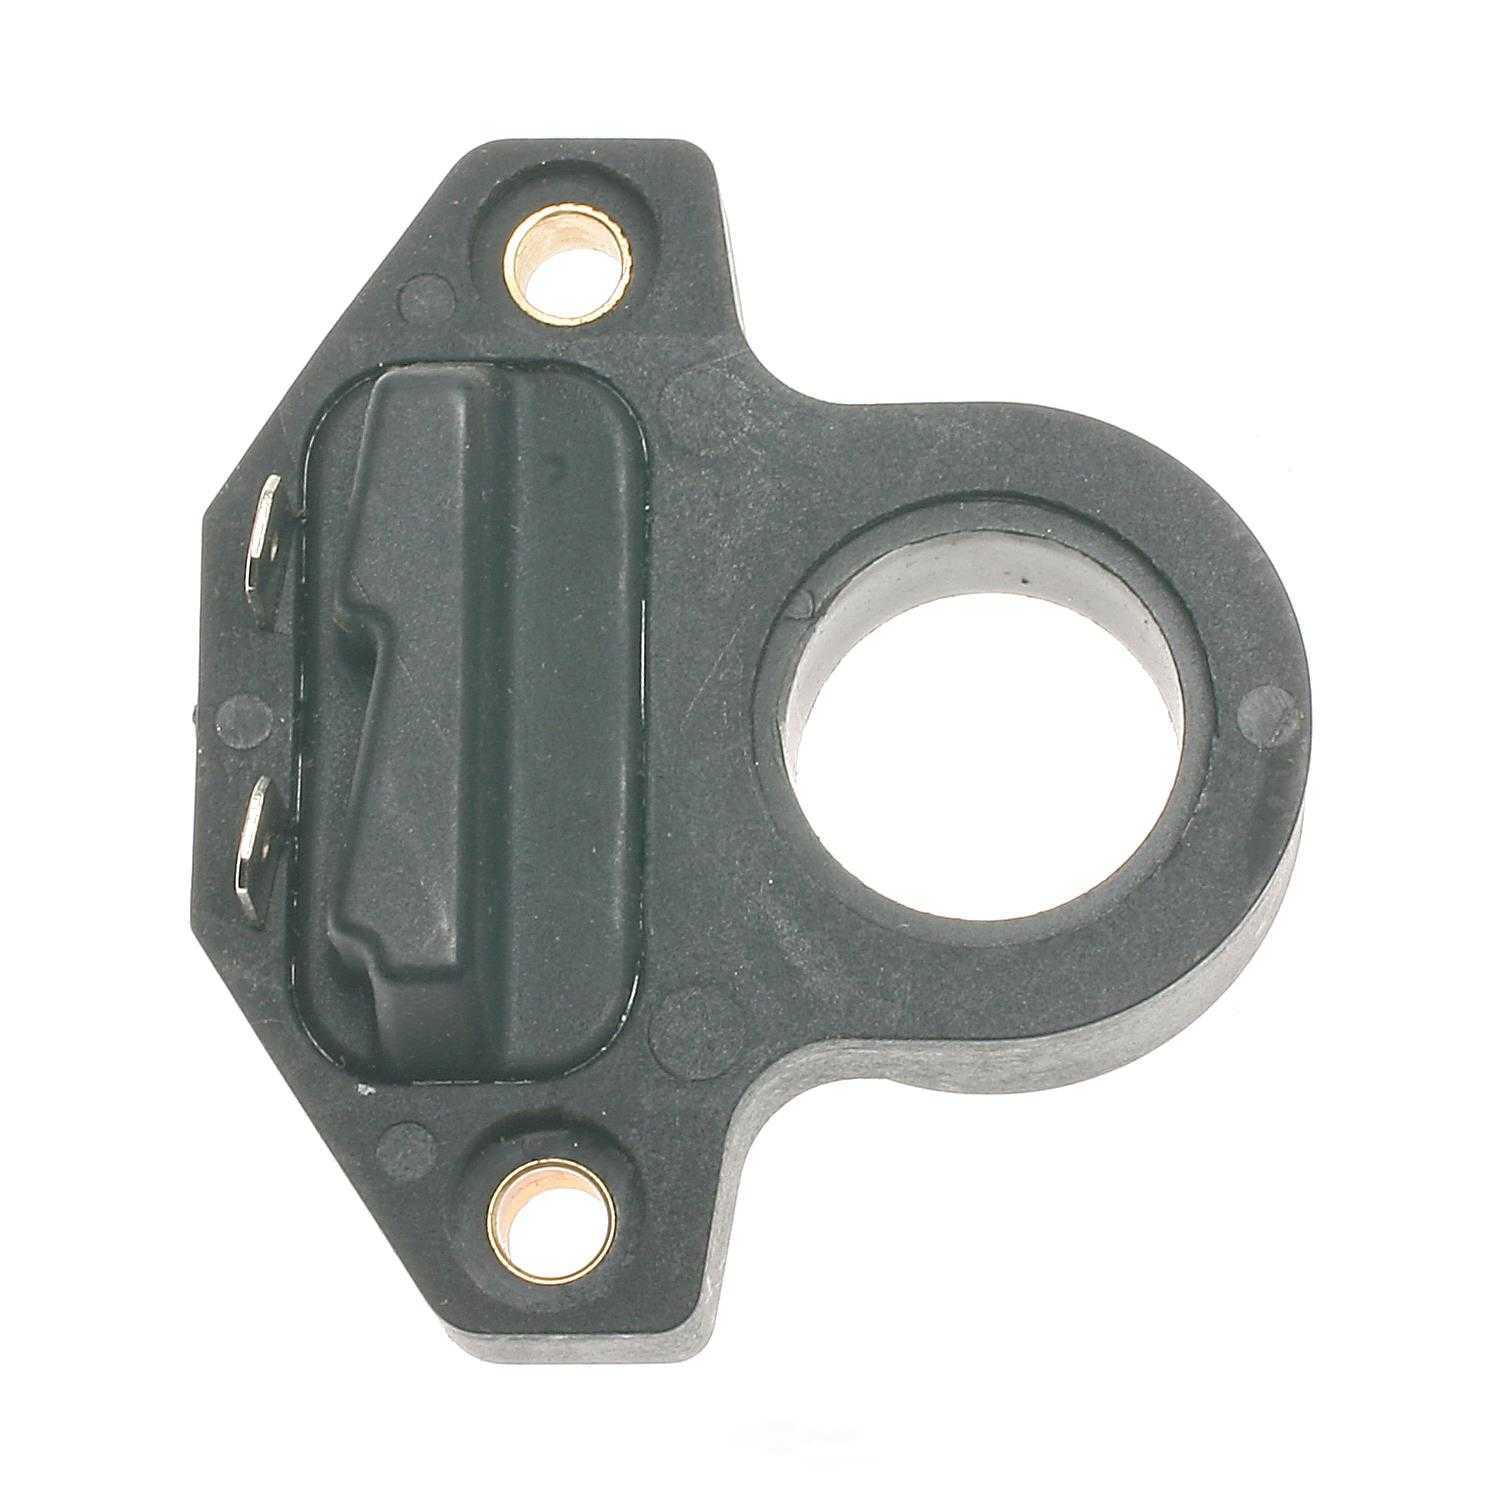 STANDARD MOTOR PRODUCTS - Distributor Ignition Pickup - STA LX-515